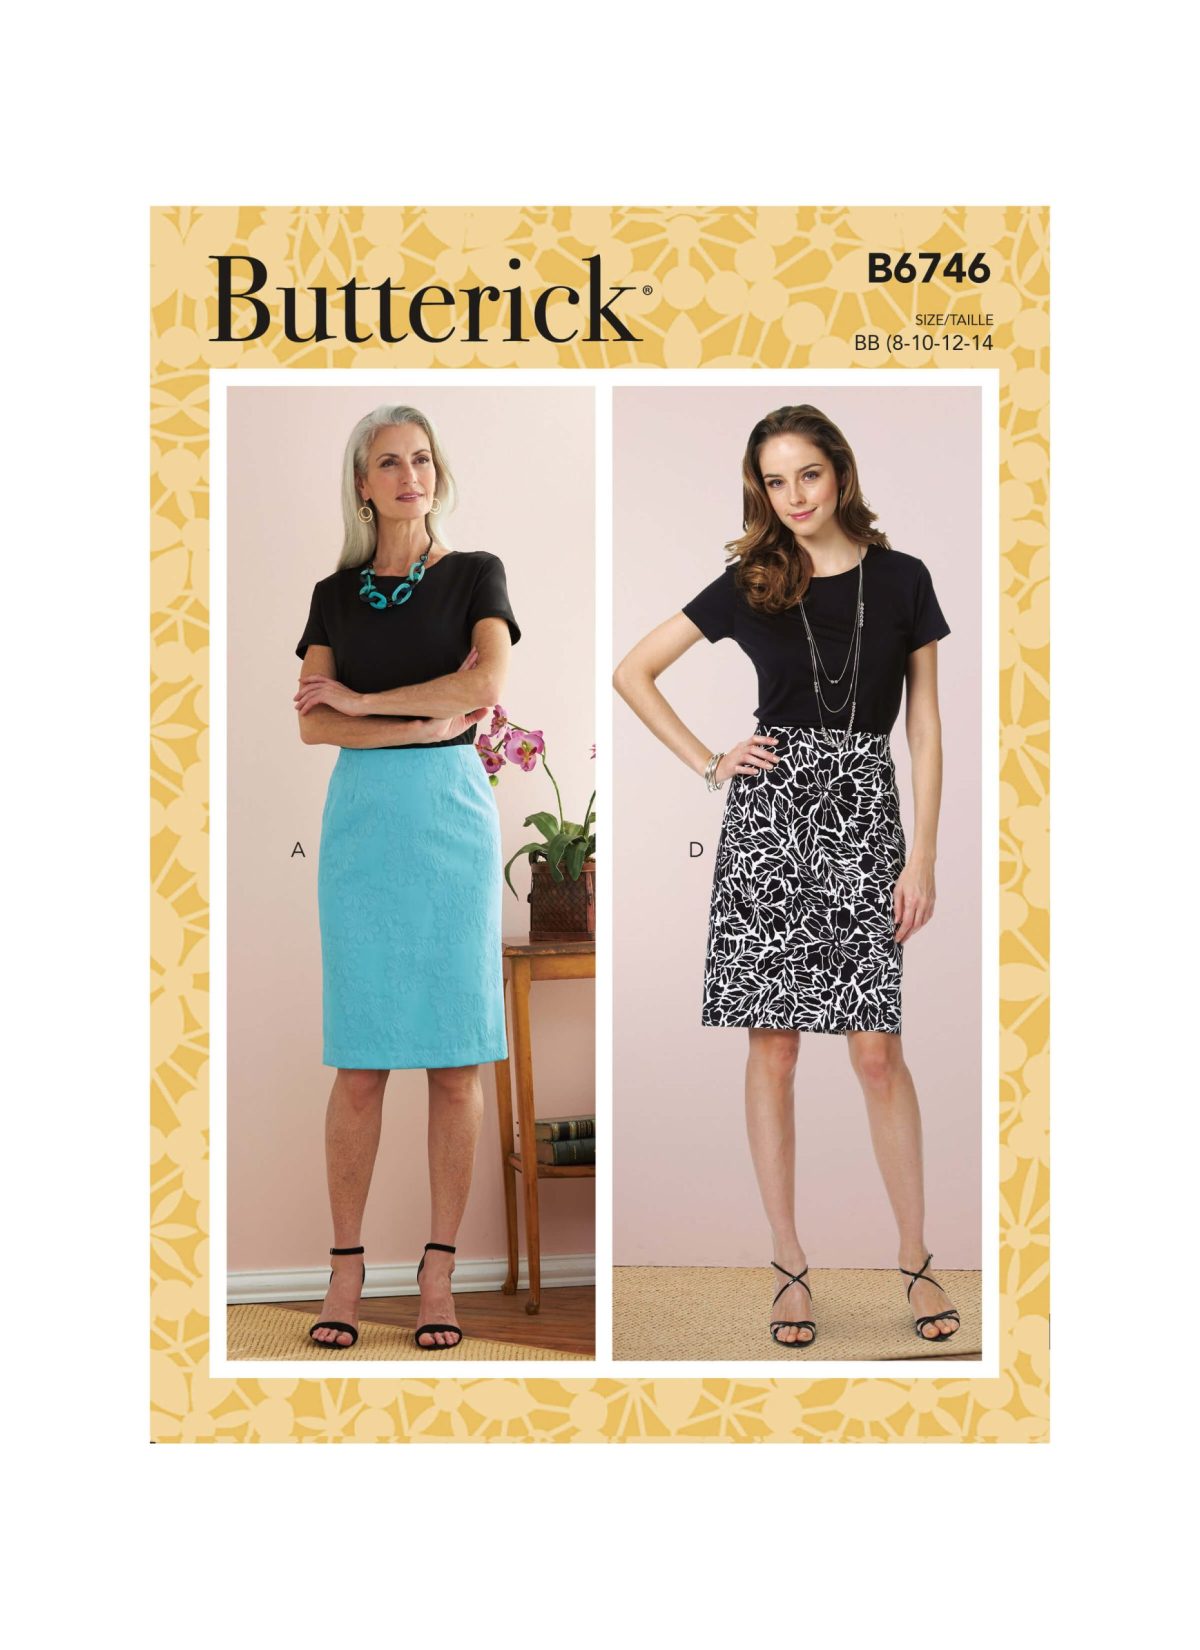 Butterick Sewing Pattern B6746 Misses' Straight Skirts and Belt